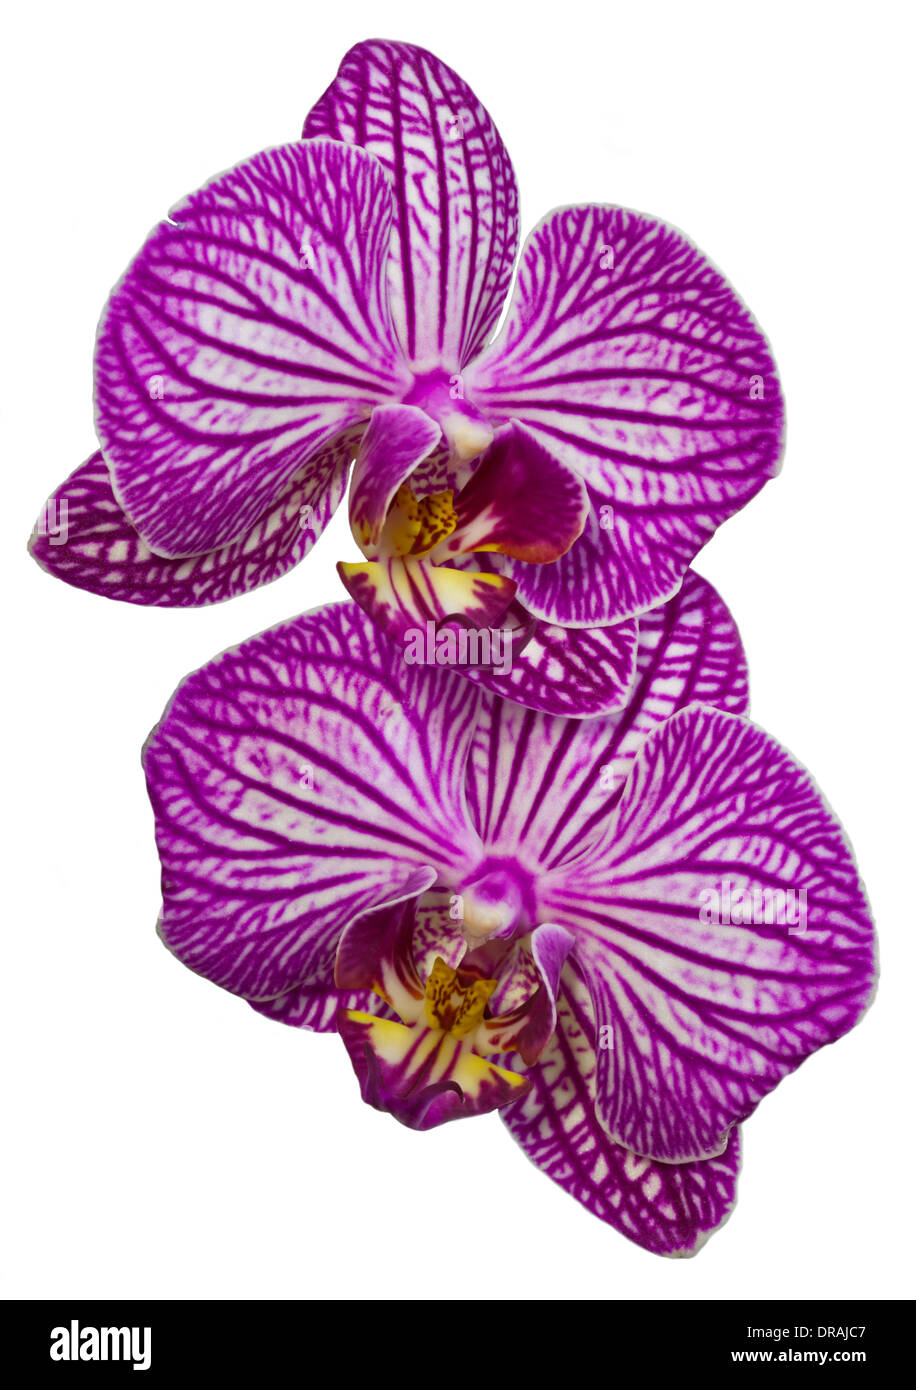 Pink Striped Phalaenopsis Orchid (Moth Orchid) Stock Photo